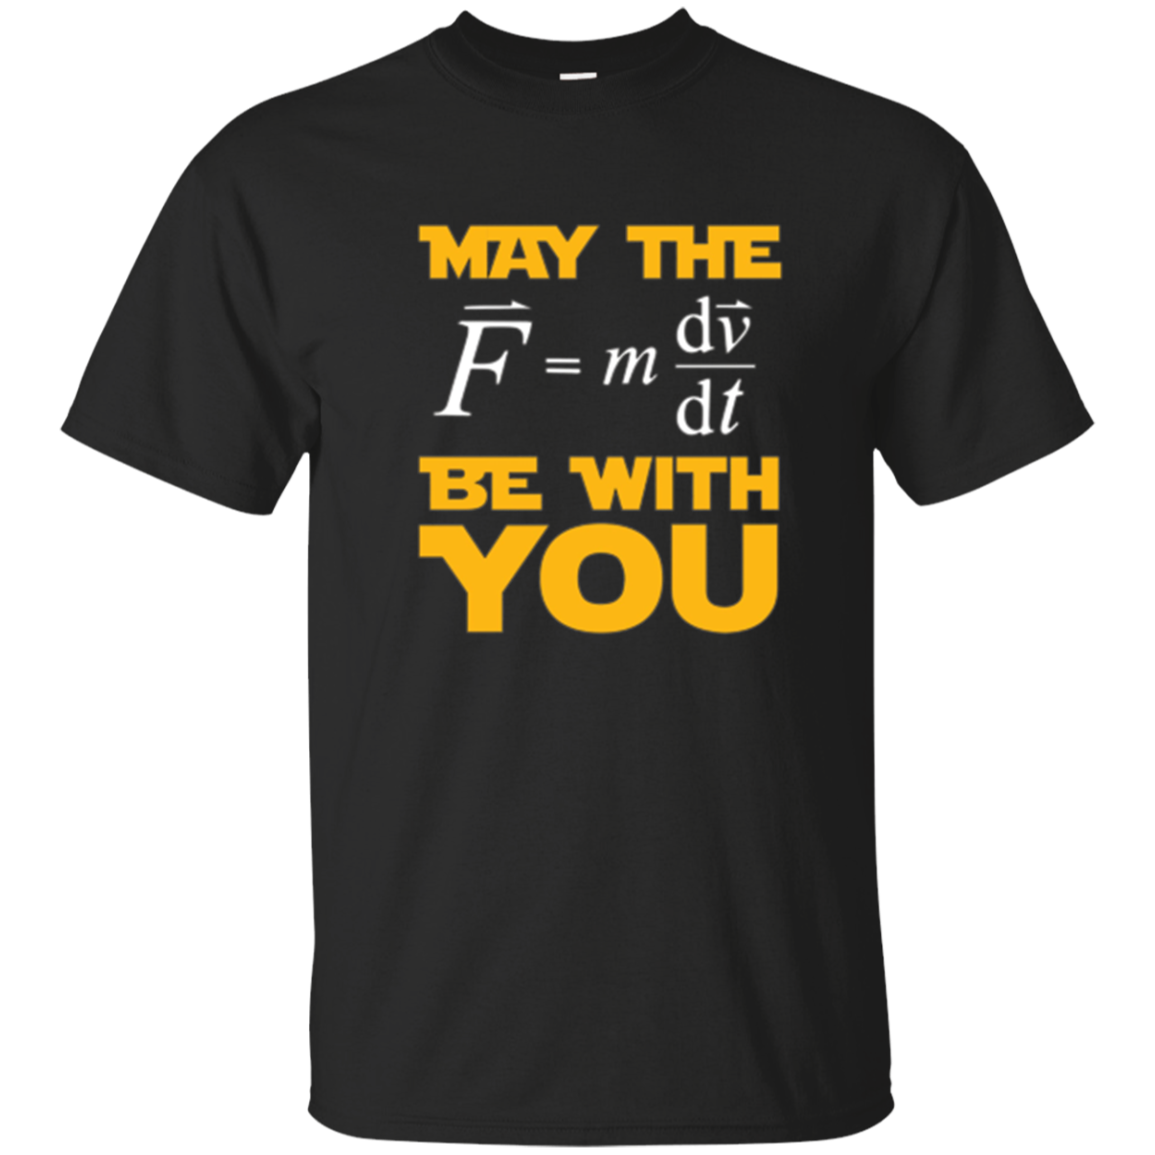 Funny May The F Be With You Tshirt - For Nerd, Science Geeks